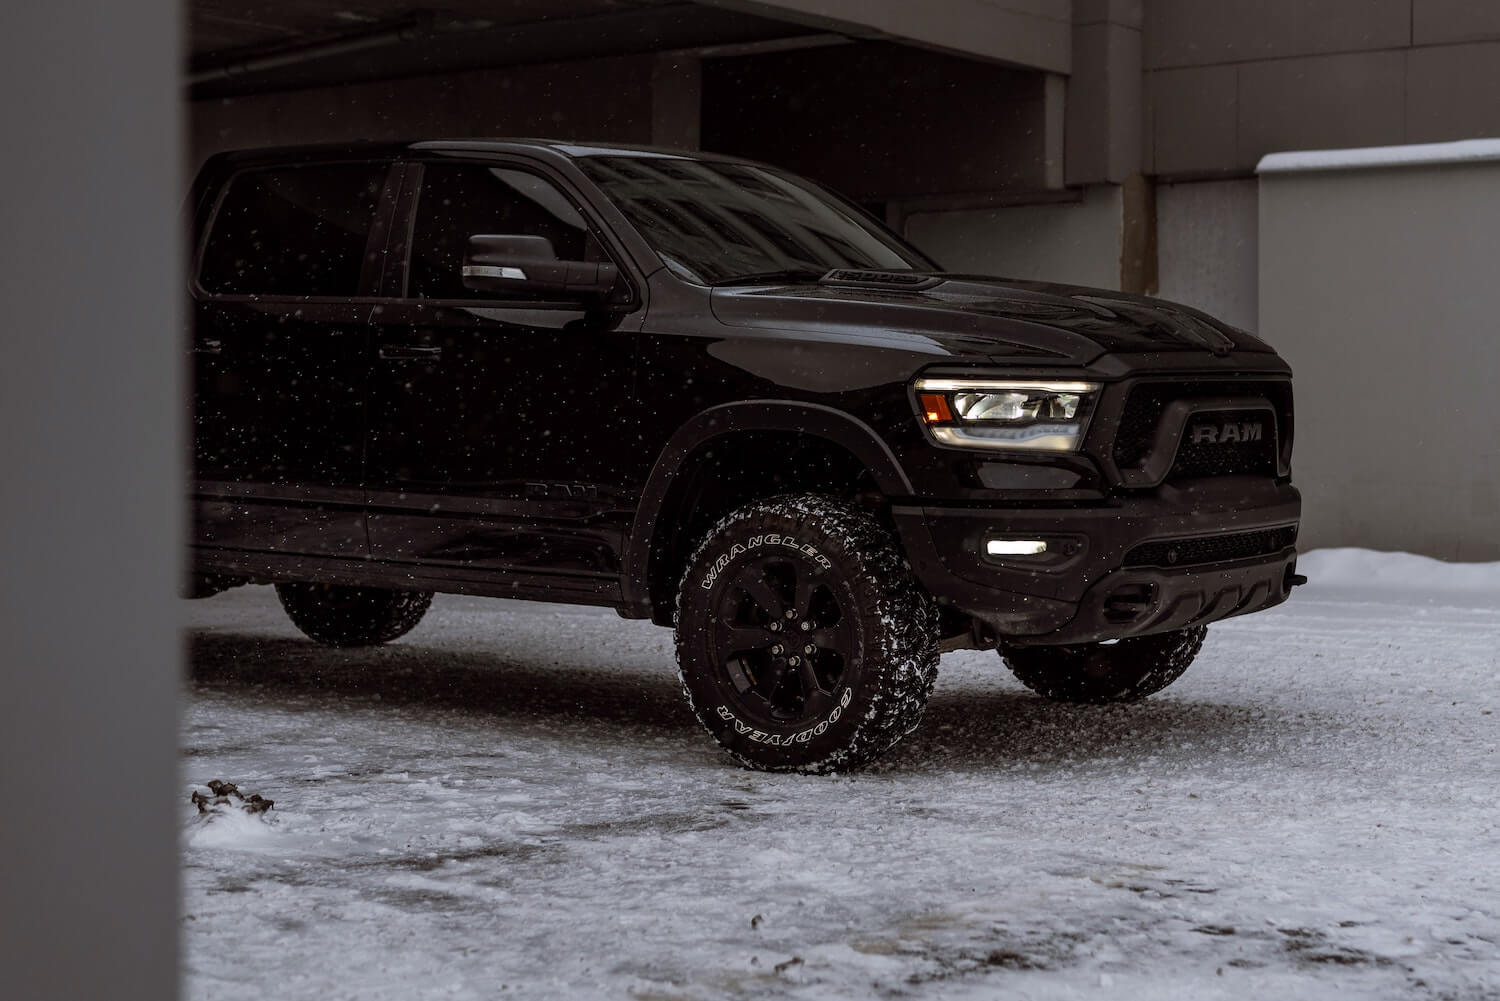 This black Ram 1500 pickup truck parked on a snowy driveway is a common vehicle to steal.